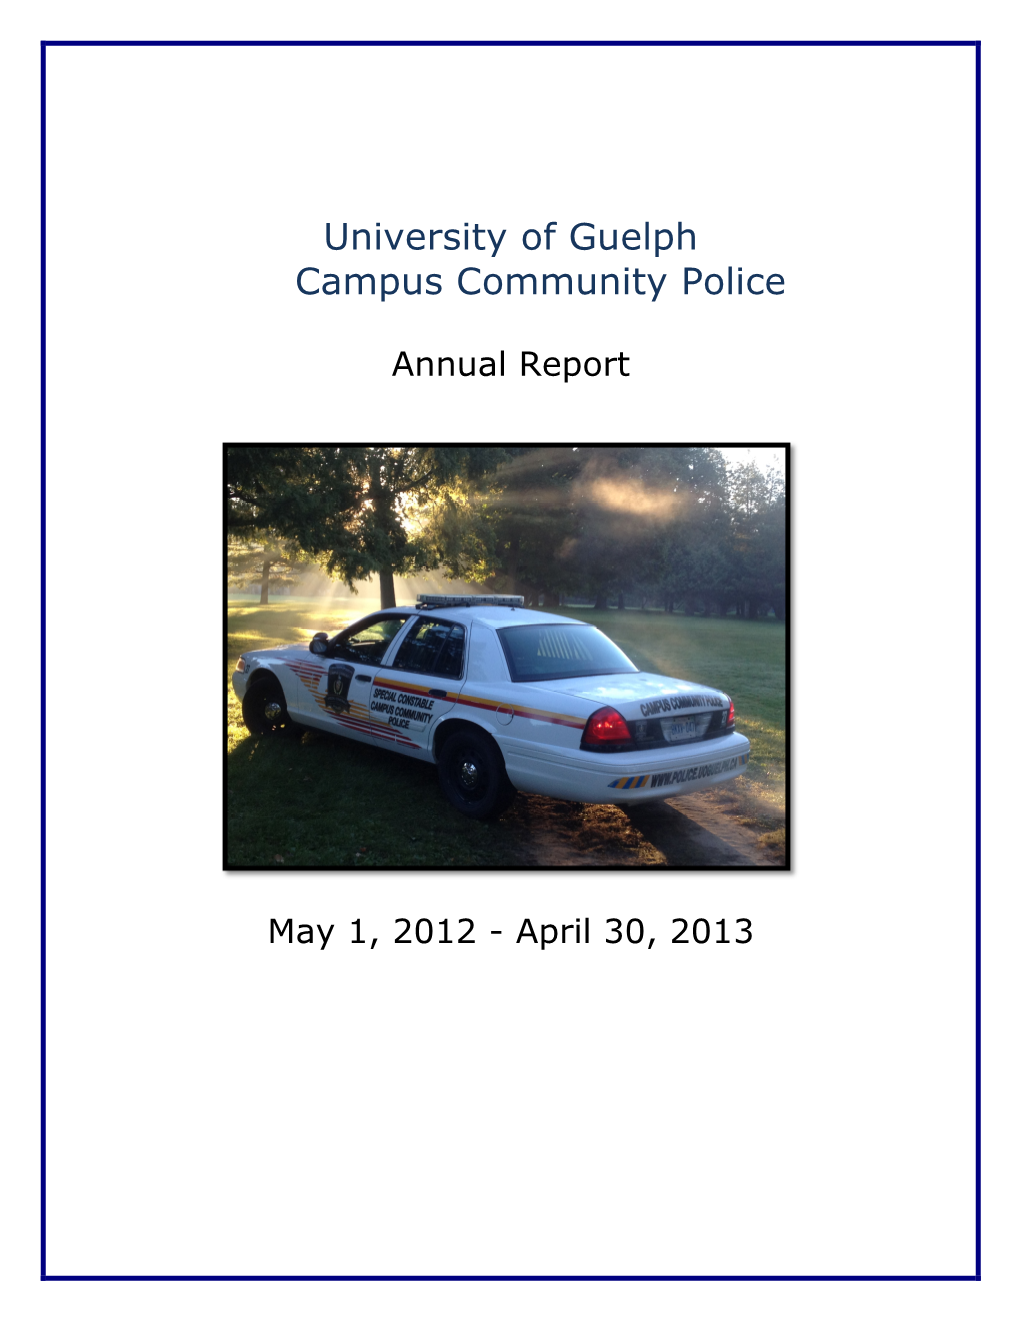 University of Guelph Campus Community Police